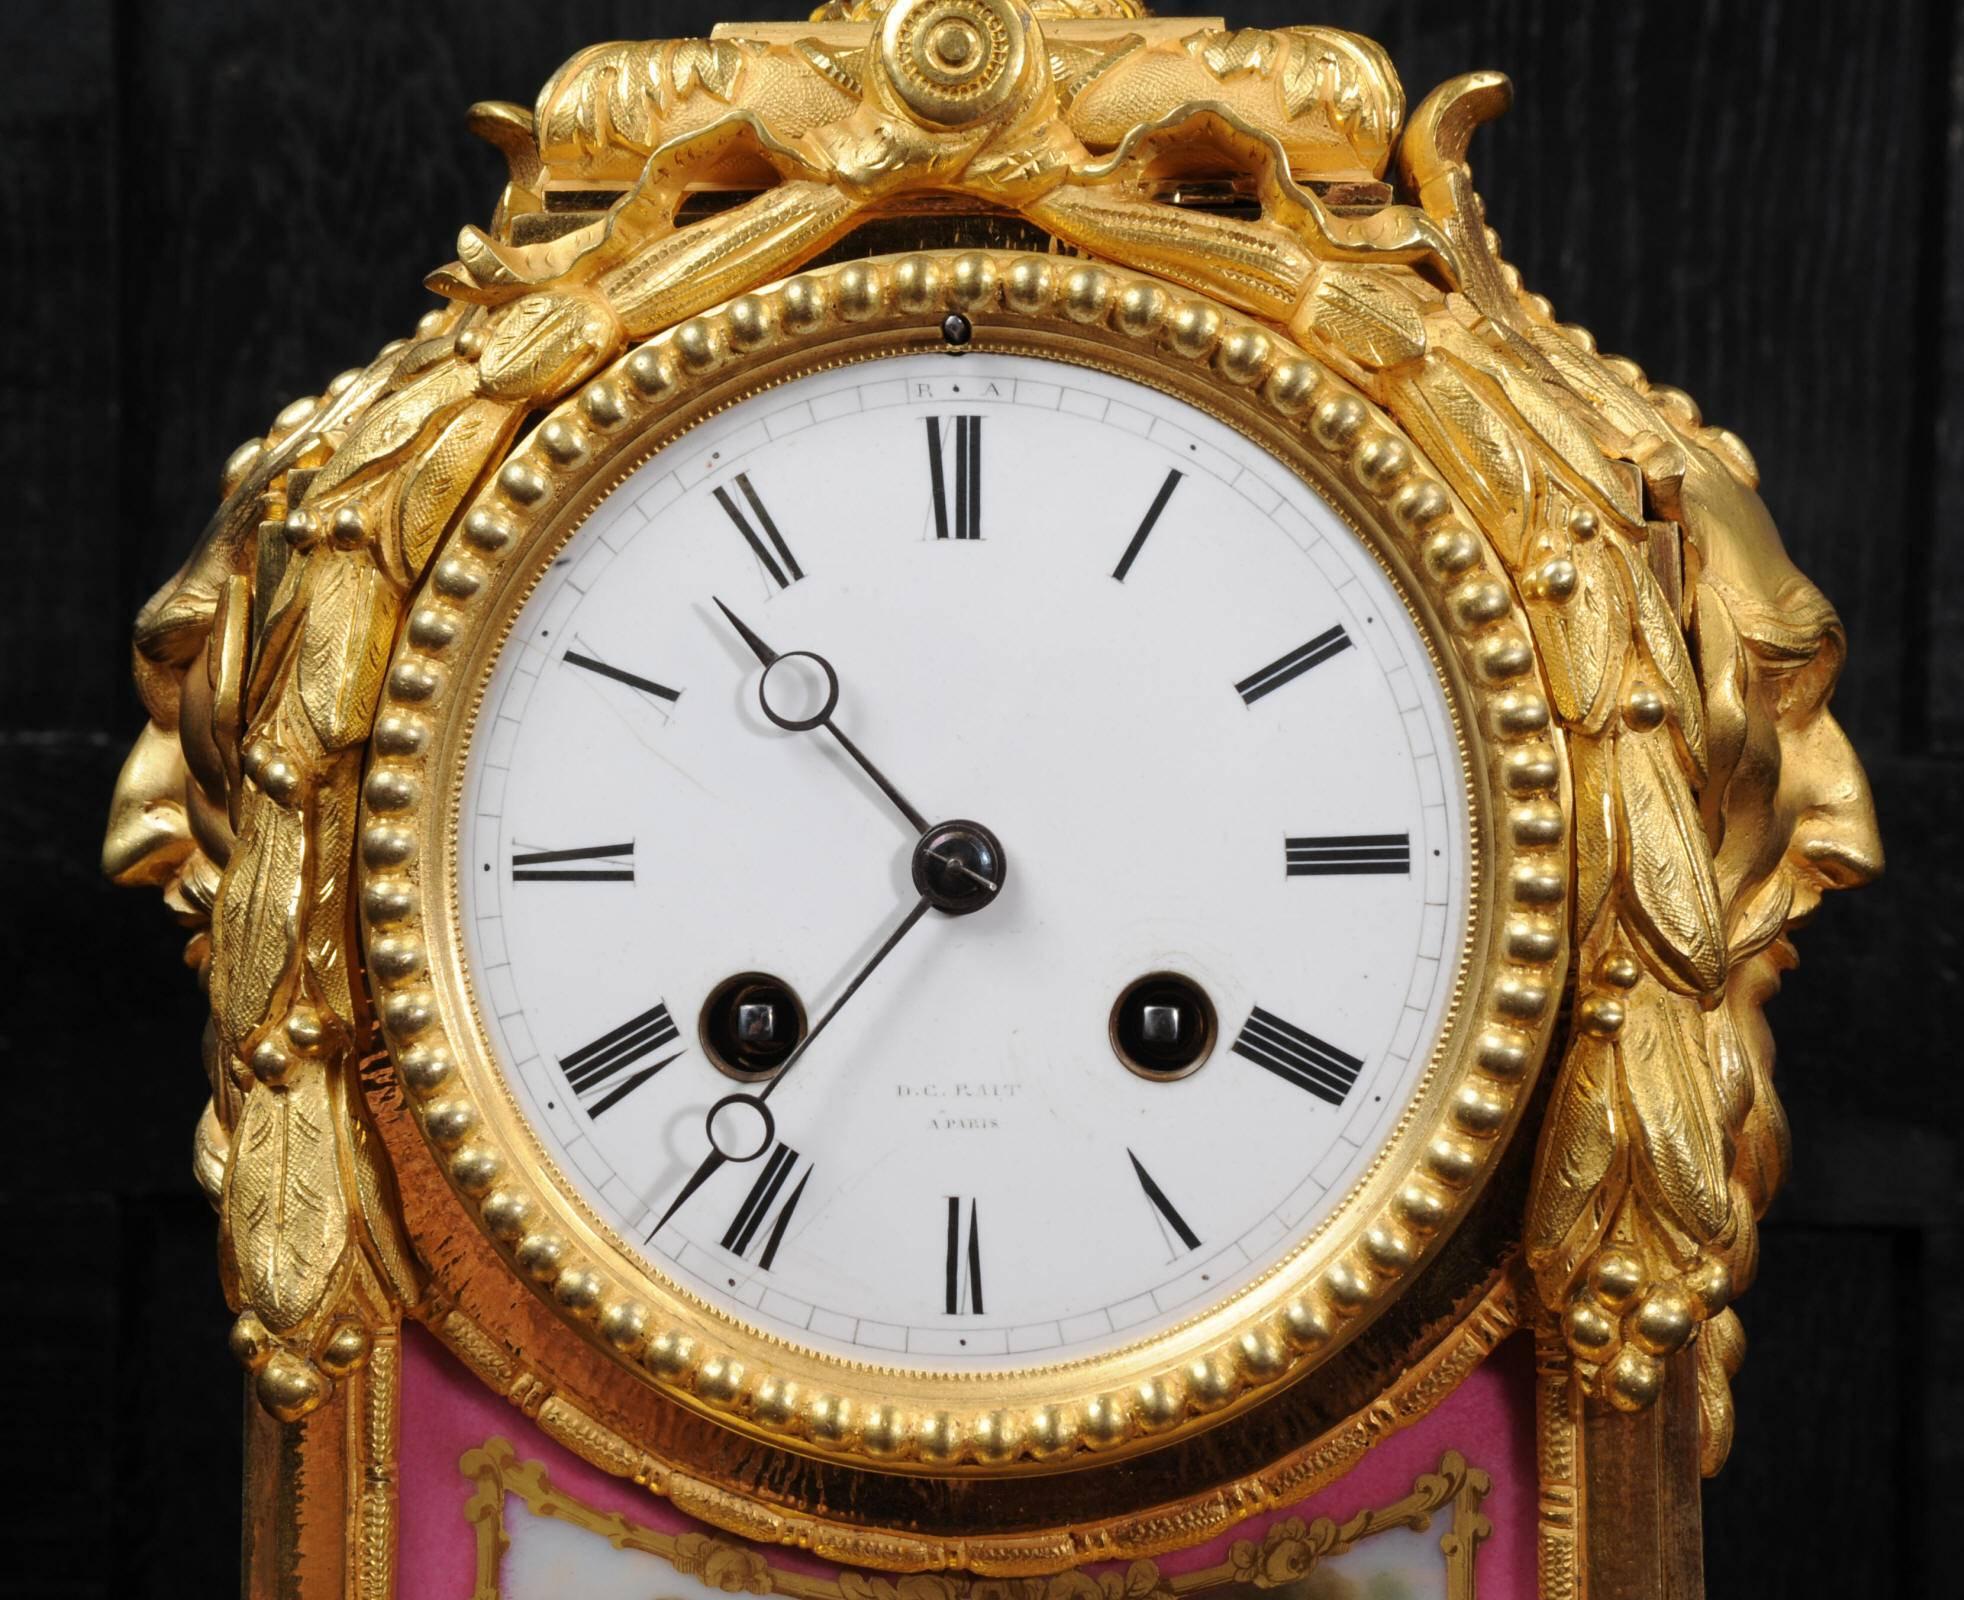 Early Ormolu and Sèvres Porcelain Clock by Raingo Frères, Fully Working 1